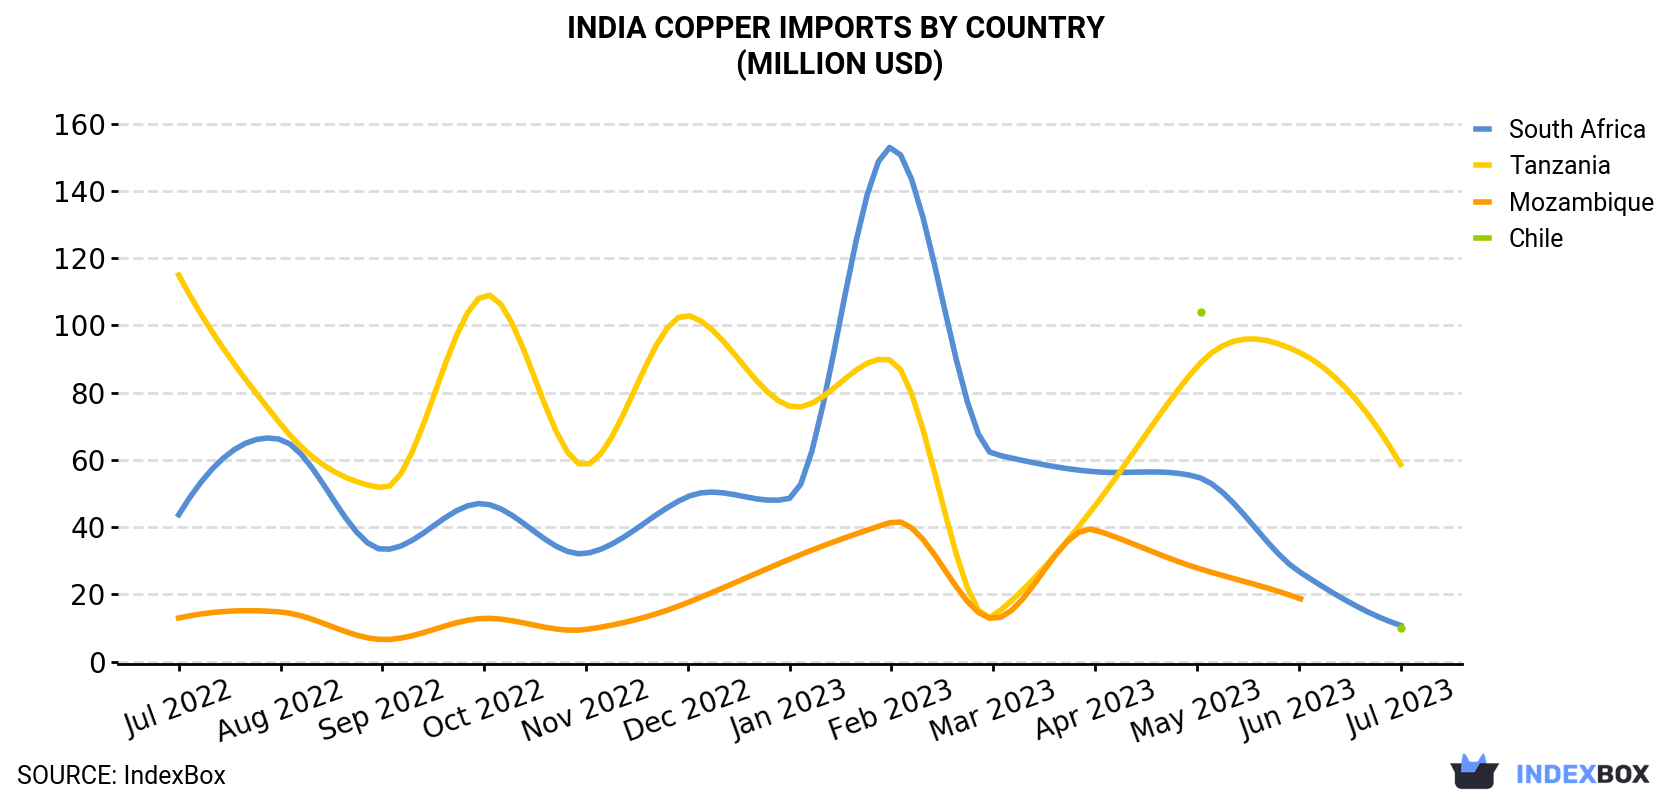 India Copper Imports By Country (Million USD)